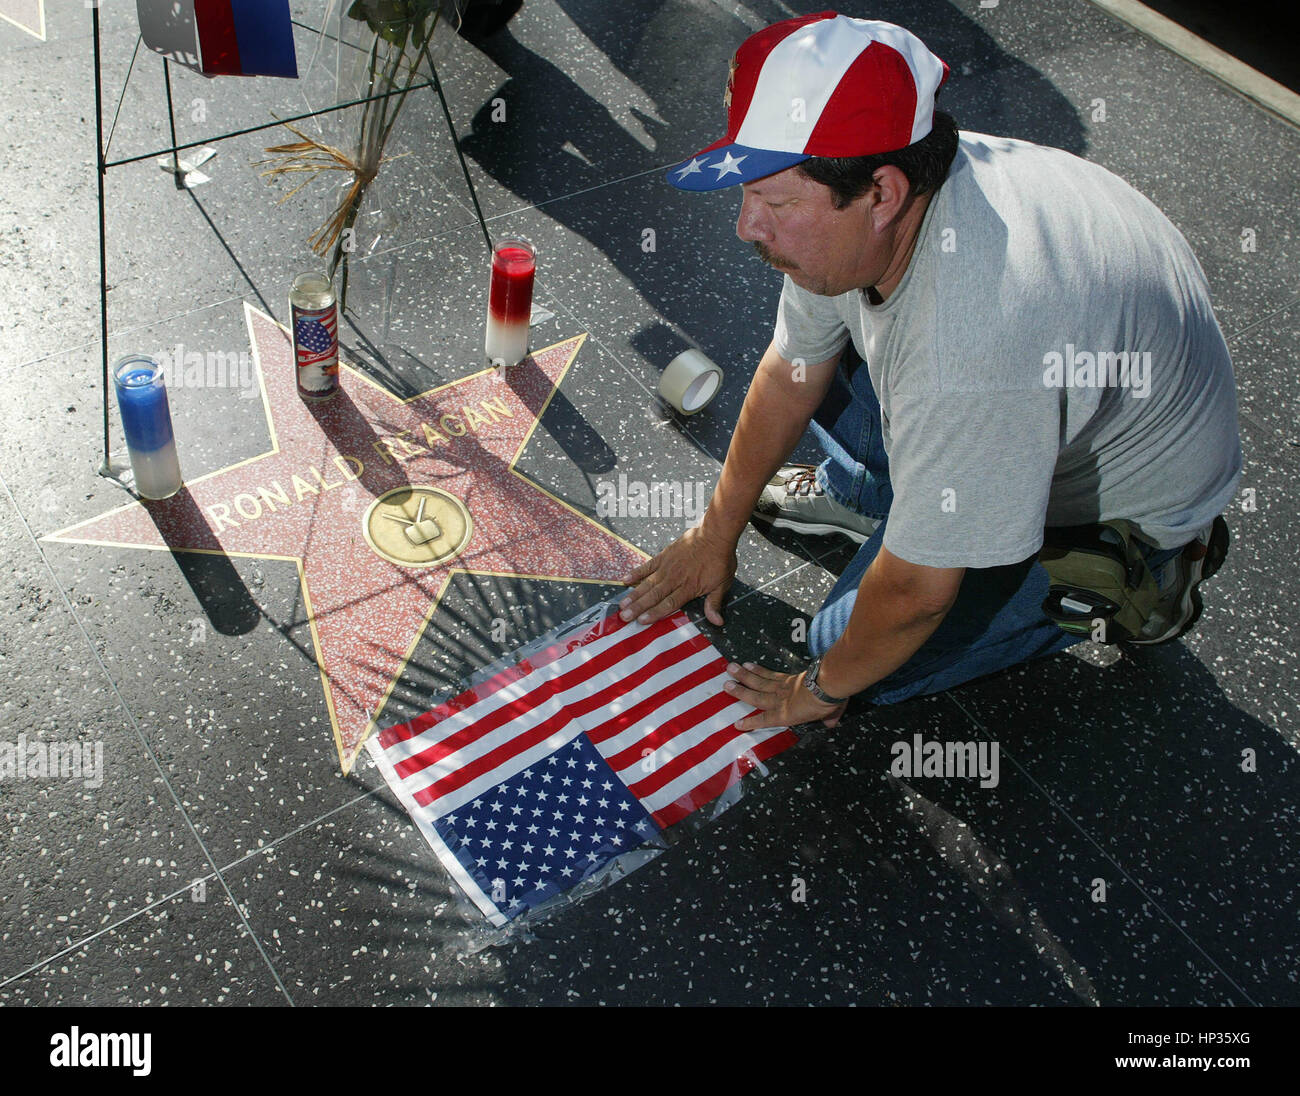 Rolando Gil Ocampo tapes a United States flag at a make shift memorial at  the Hollywood Walk of Fame star for the late President Ronald Reagan in Los  Angeles, California on June